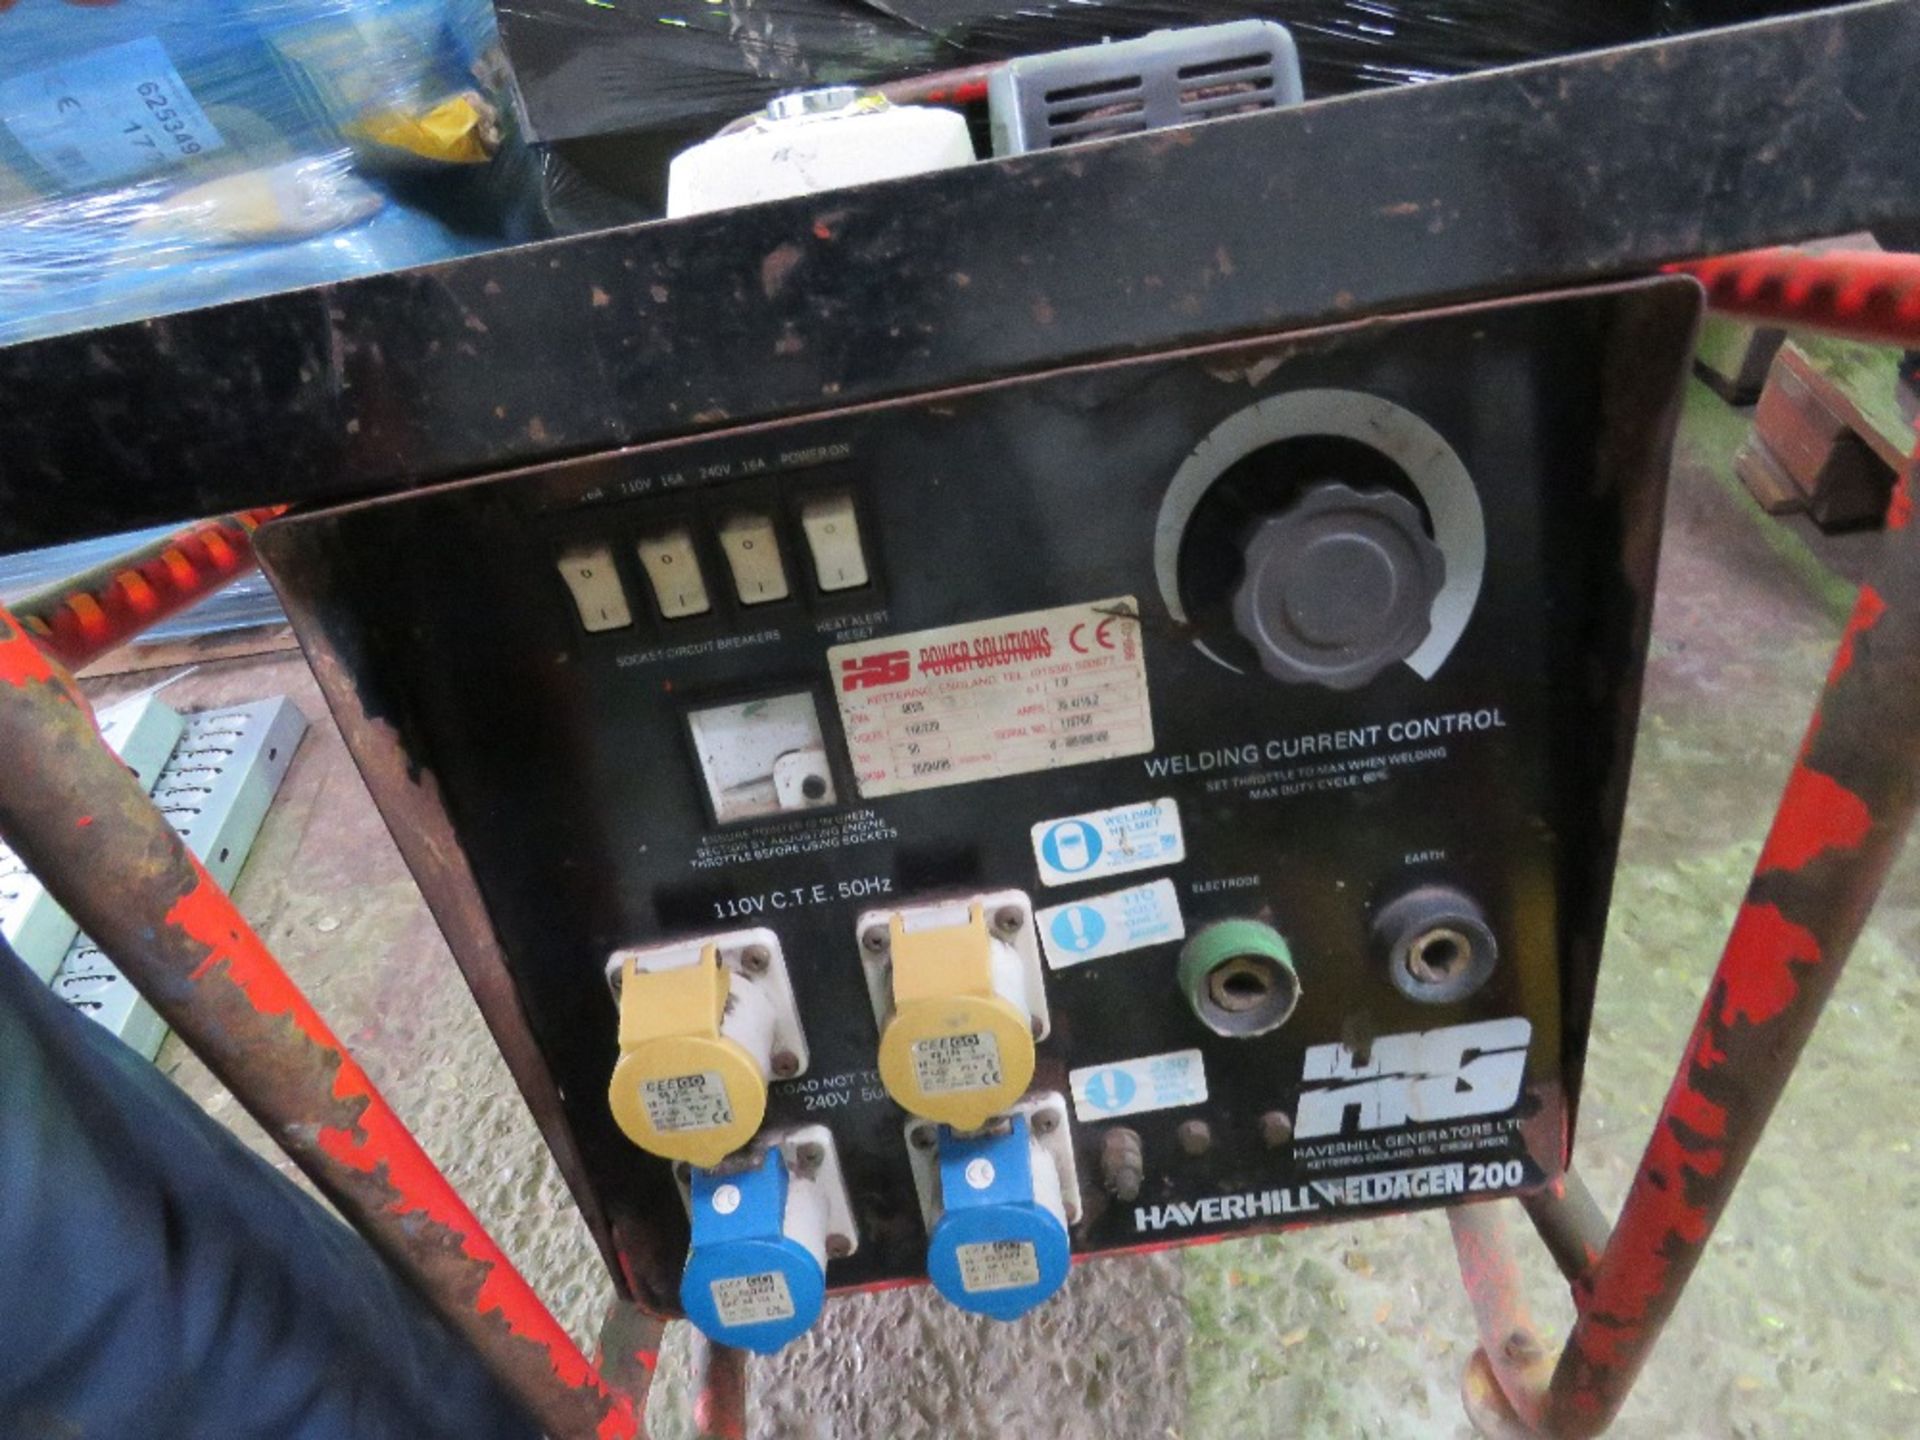 HONDA ENGINED WELDER GENERATOR. WHNE TESTED WAS SEEN TO RUN, OUTPUT UNTESTED. - Image 4 of 4